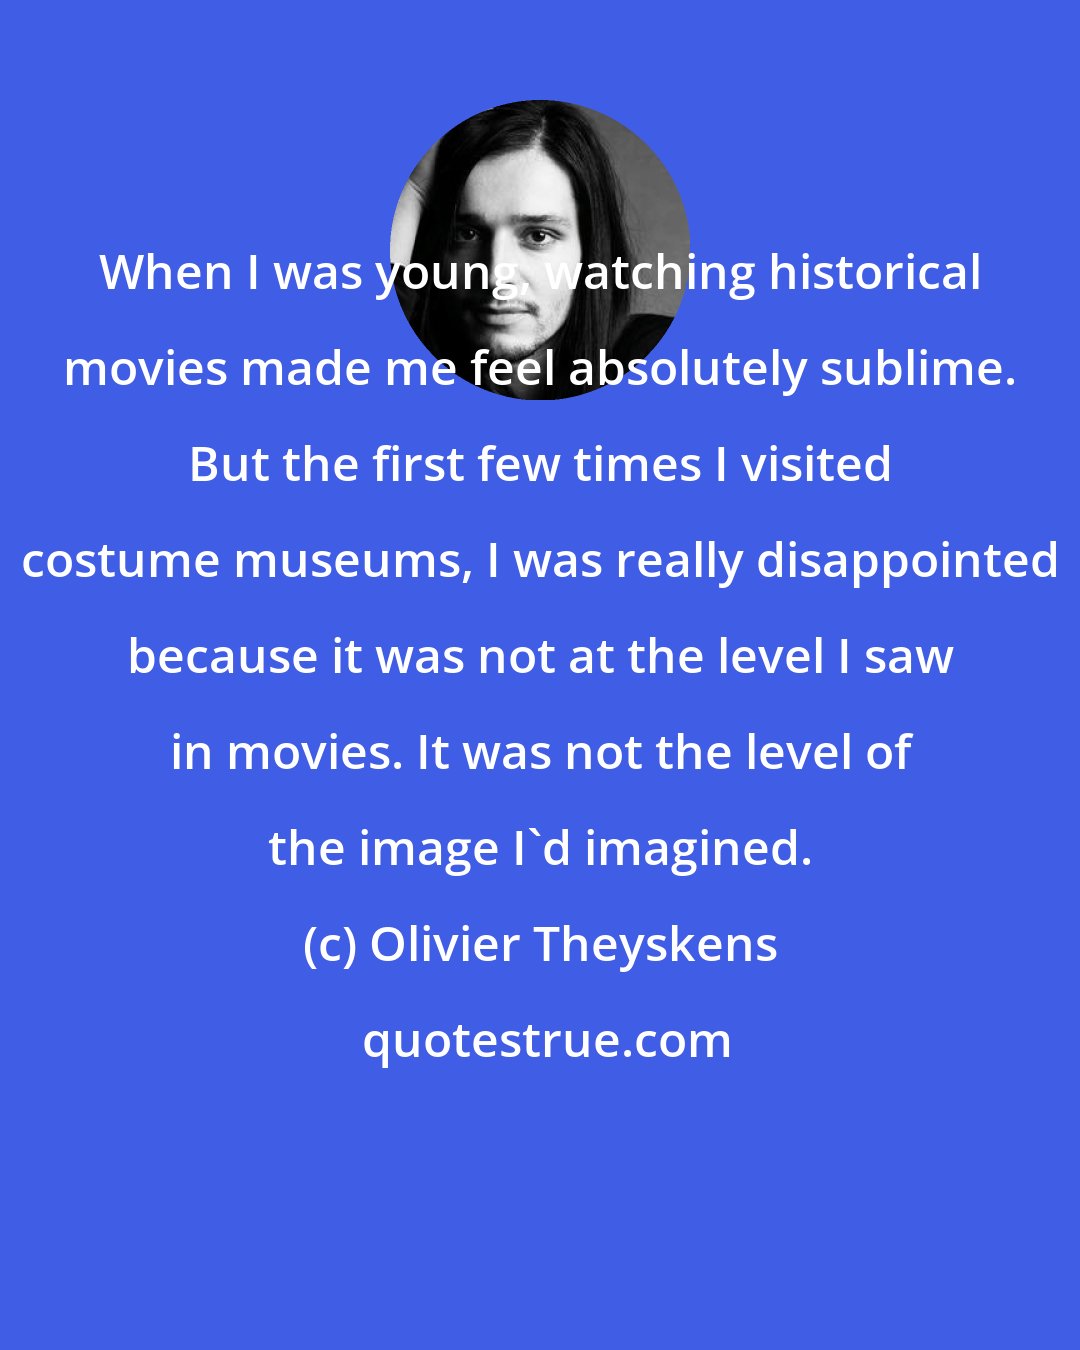 Olivier Theyskens: When I was young, watching historical movies made me feel absolutely sublime. But the first few times I visited costume museums, I was really disappointed because it was not at the level I saw in movies. It was not the level of the image I'd imagined.